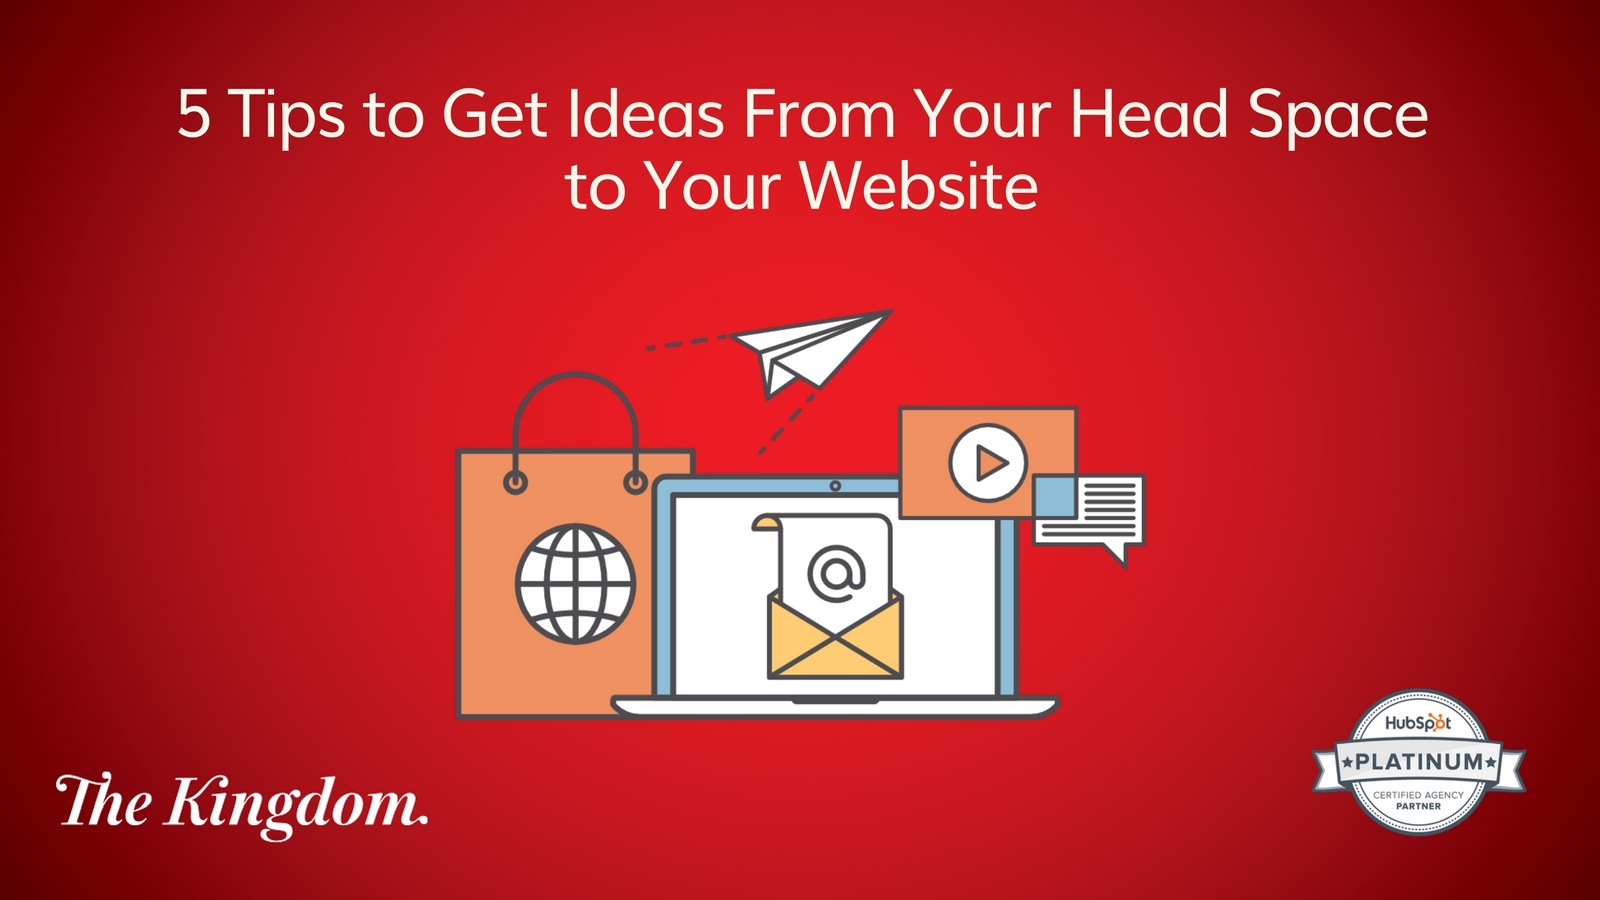 5_Tips_to_Get_Ideas_From_Your_Head_Space_to_Your_Website.jpg.jpg